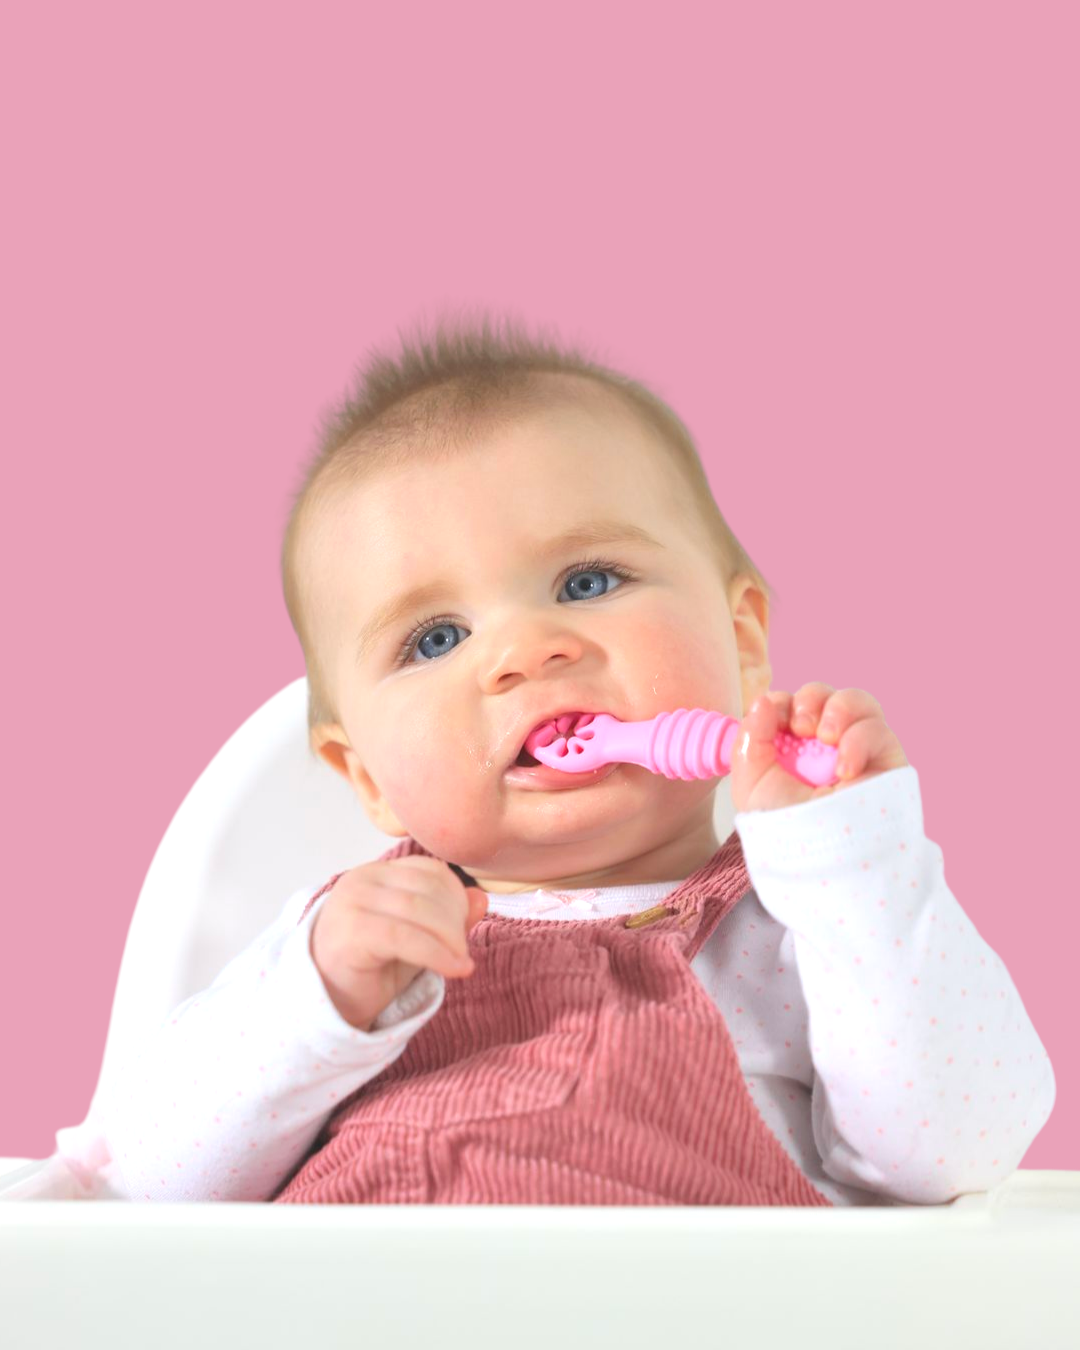 Introducing a Training Spoon Teether at 3 months